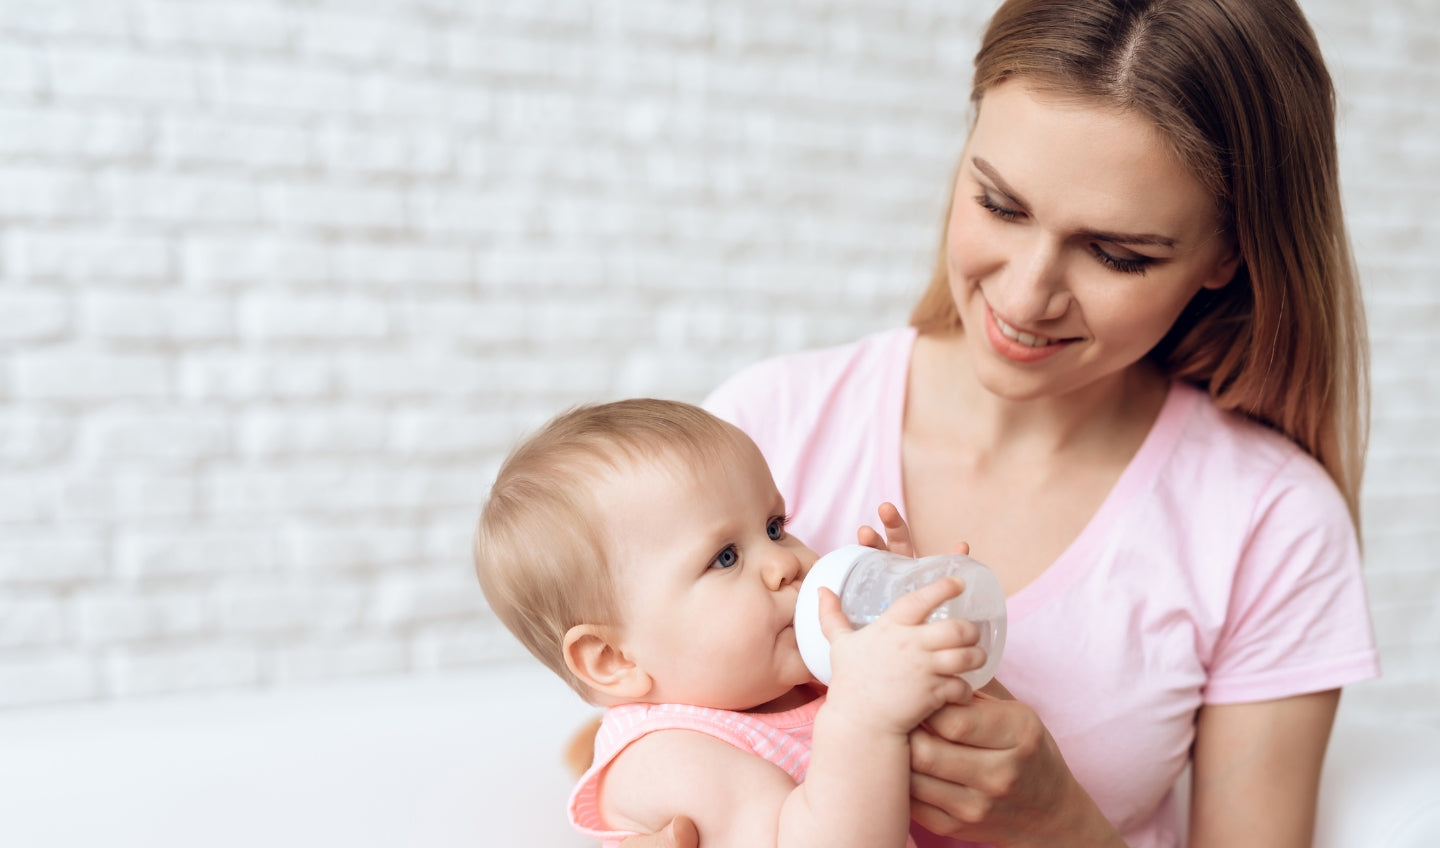 Common questions related to bottle-feeding babies answered